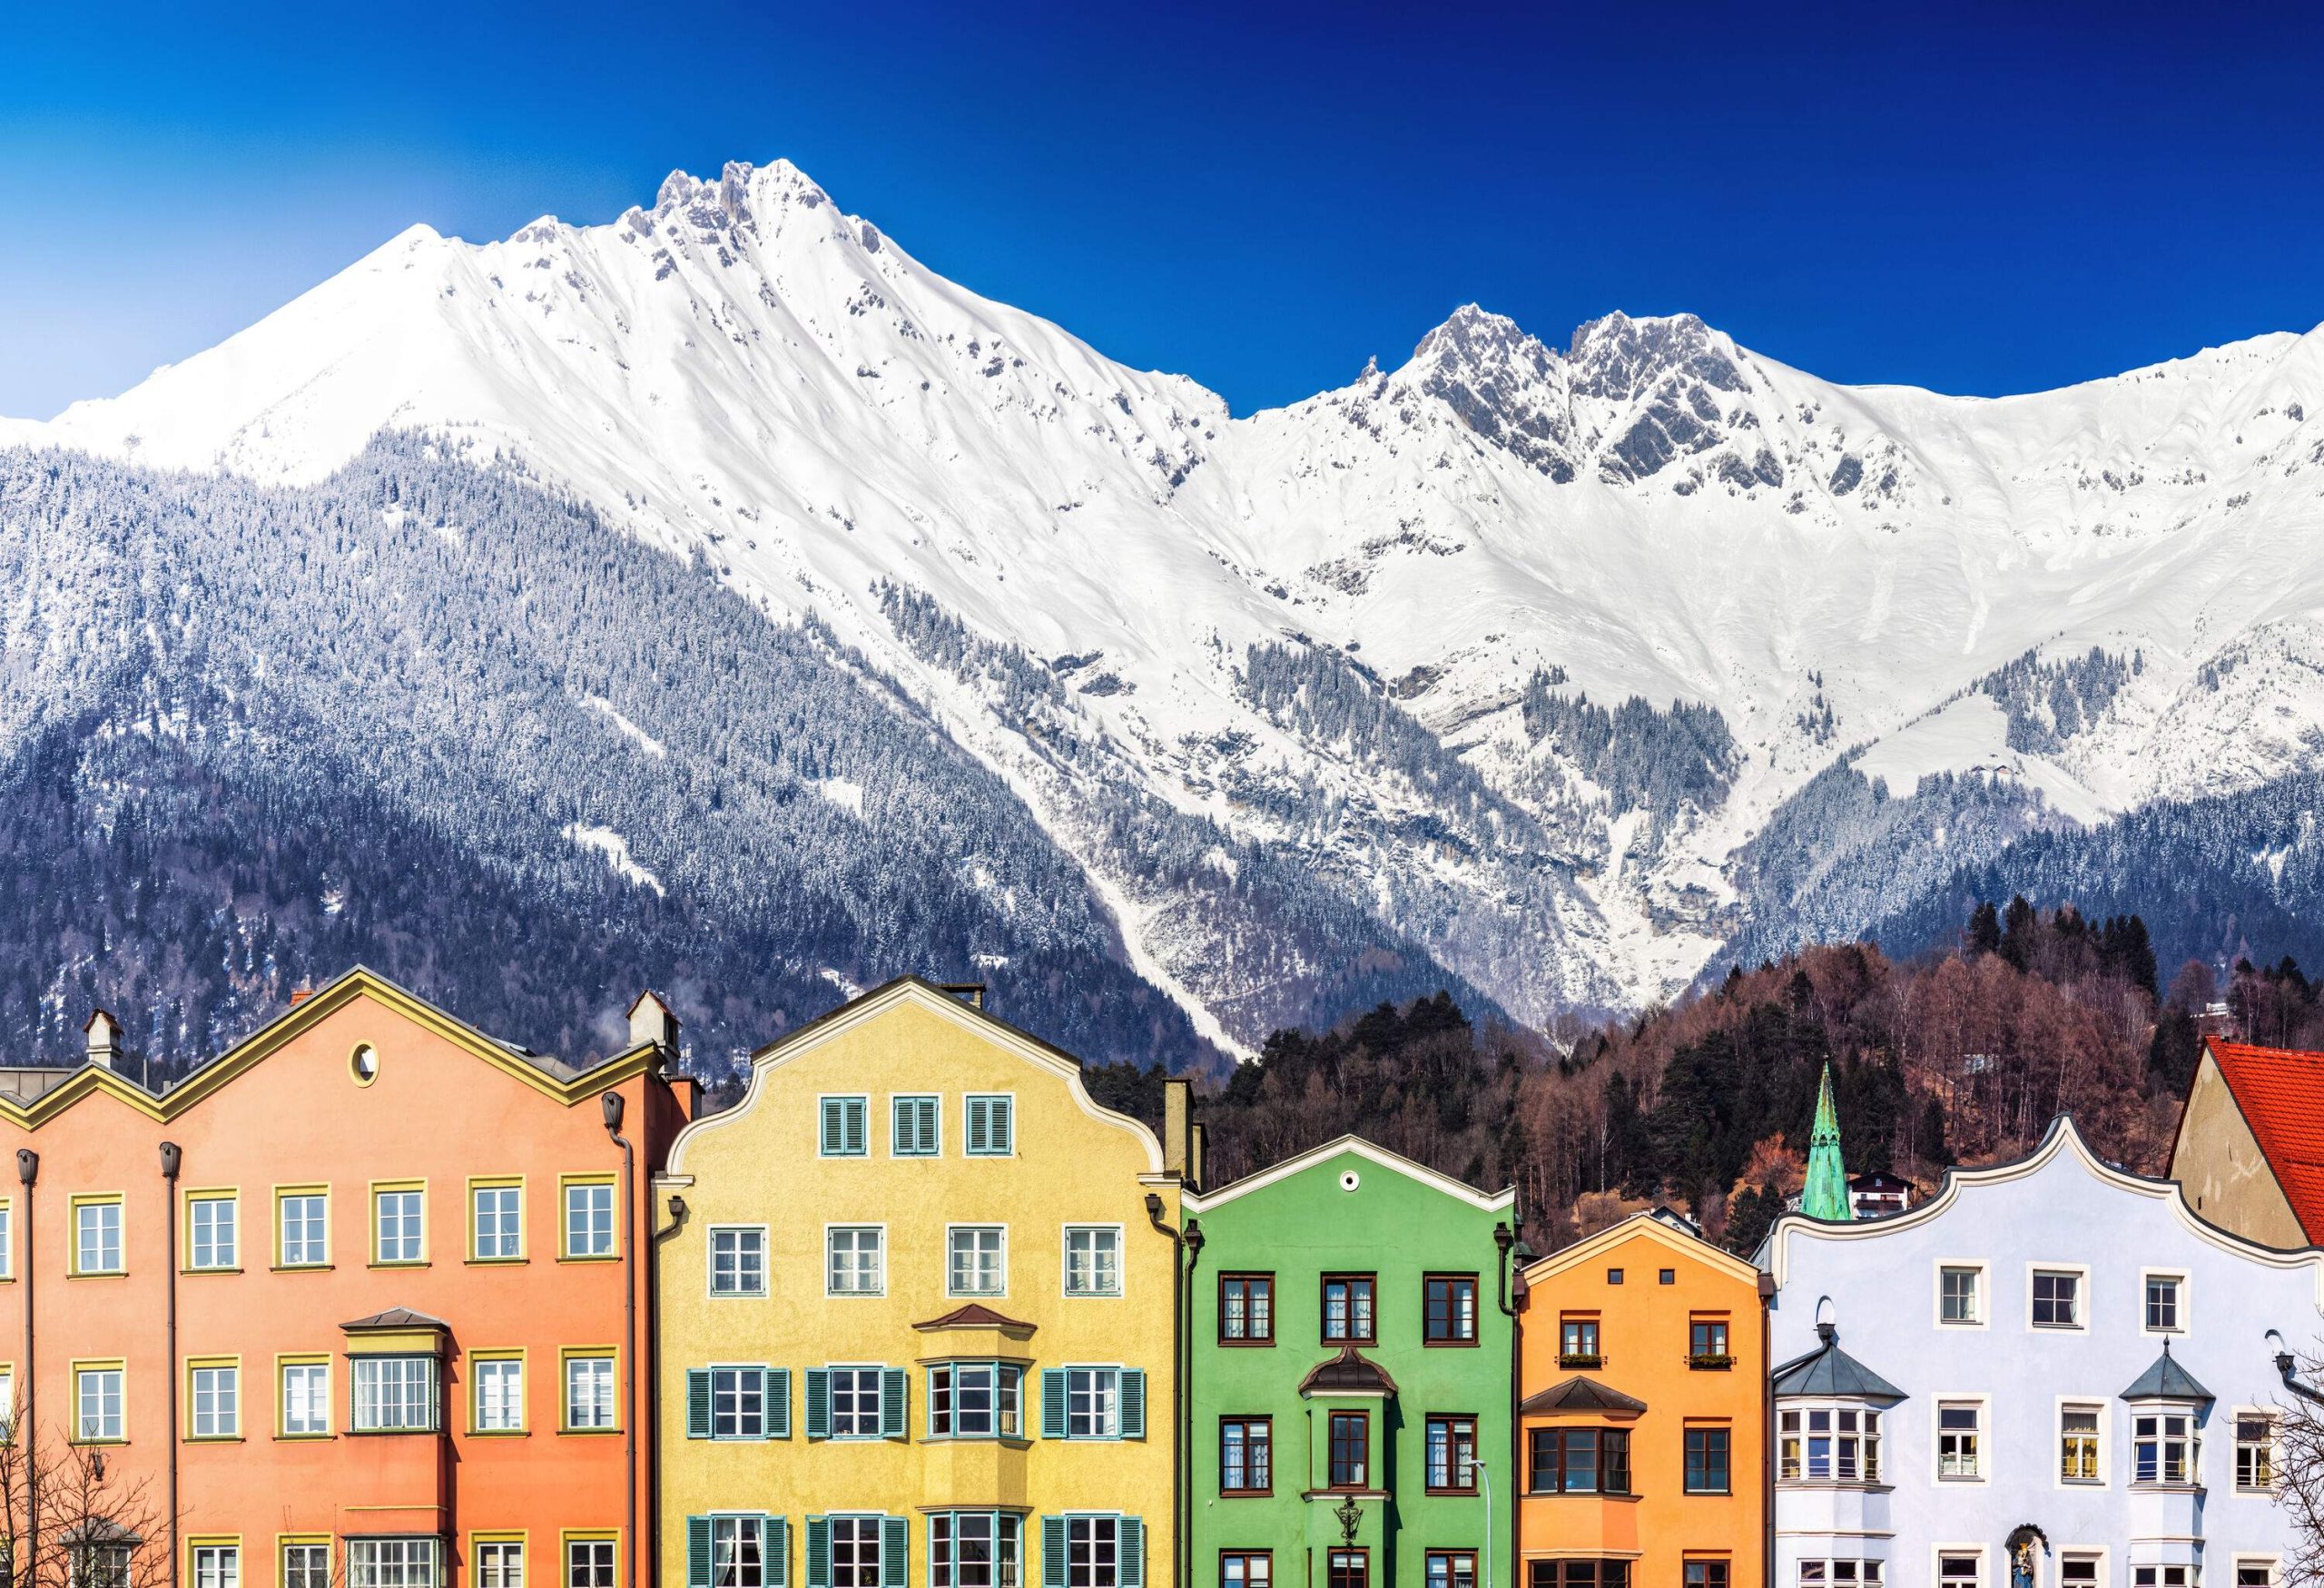 A snow-covered mountain range behind a row of houses with colourful façades.